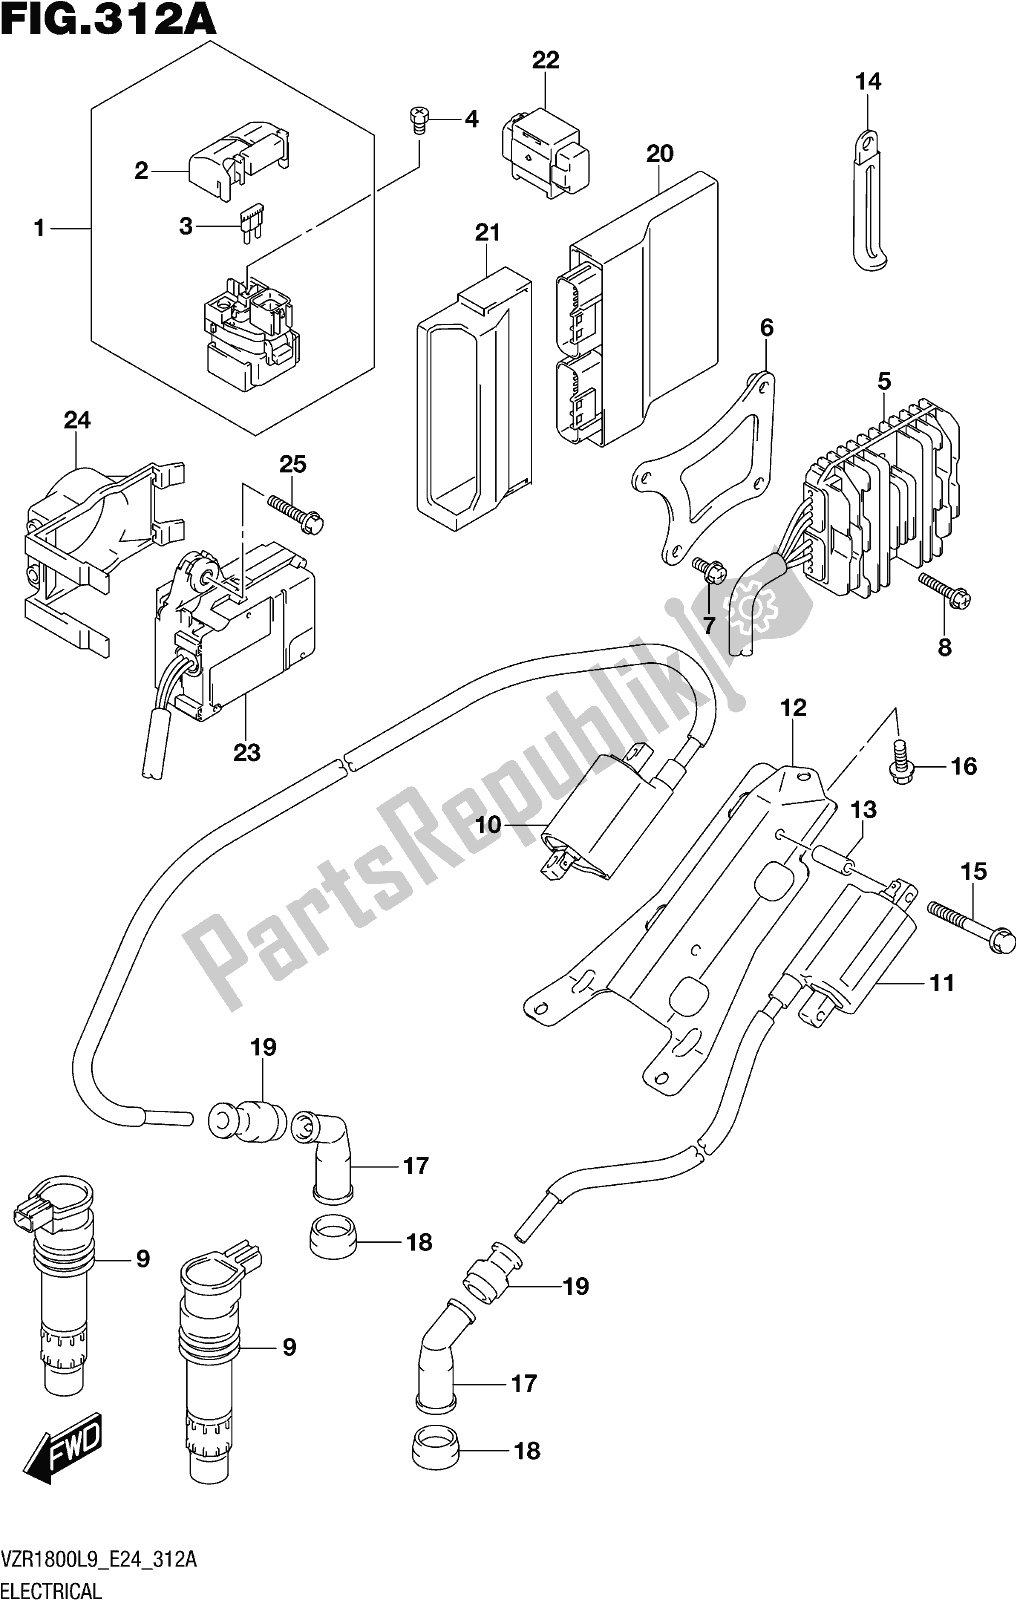 All parts for the Fig. 312a Electrical of the Suzuki VZR 1800 BZ 2019